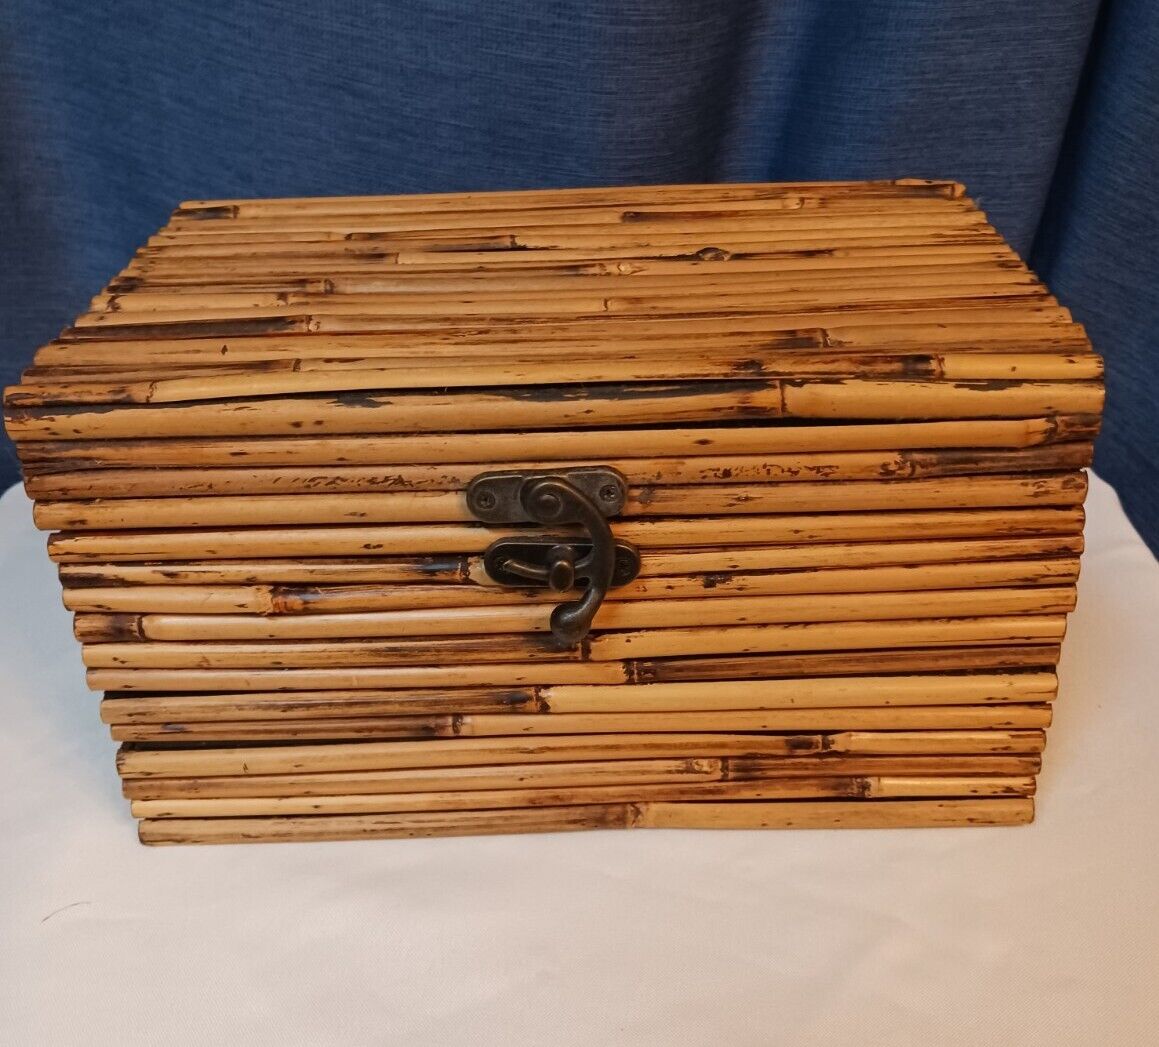 Unique Bamboo Box With Hinge Lid Vintage Petite Storage Container